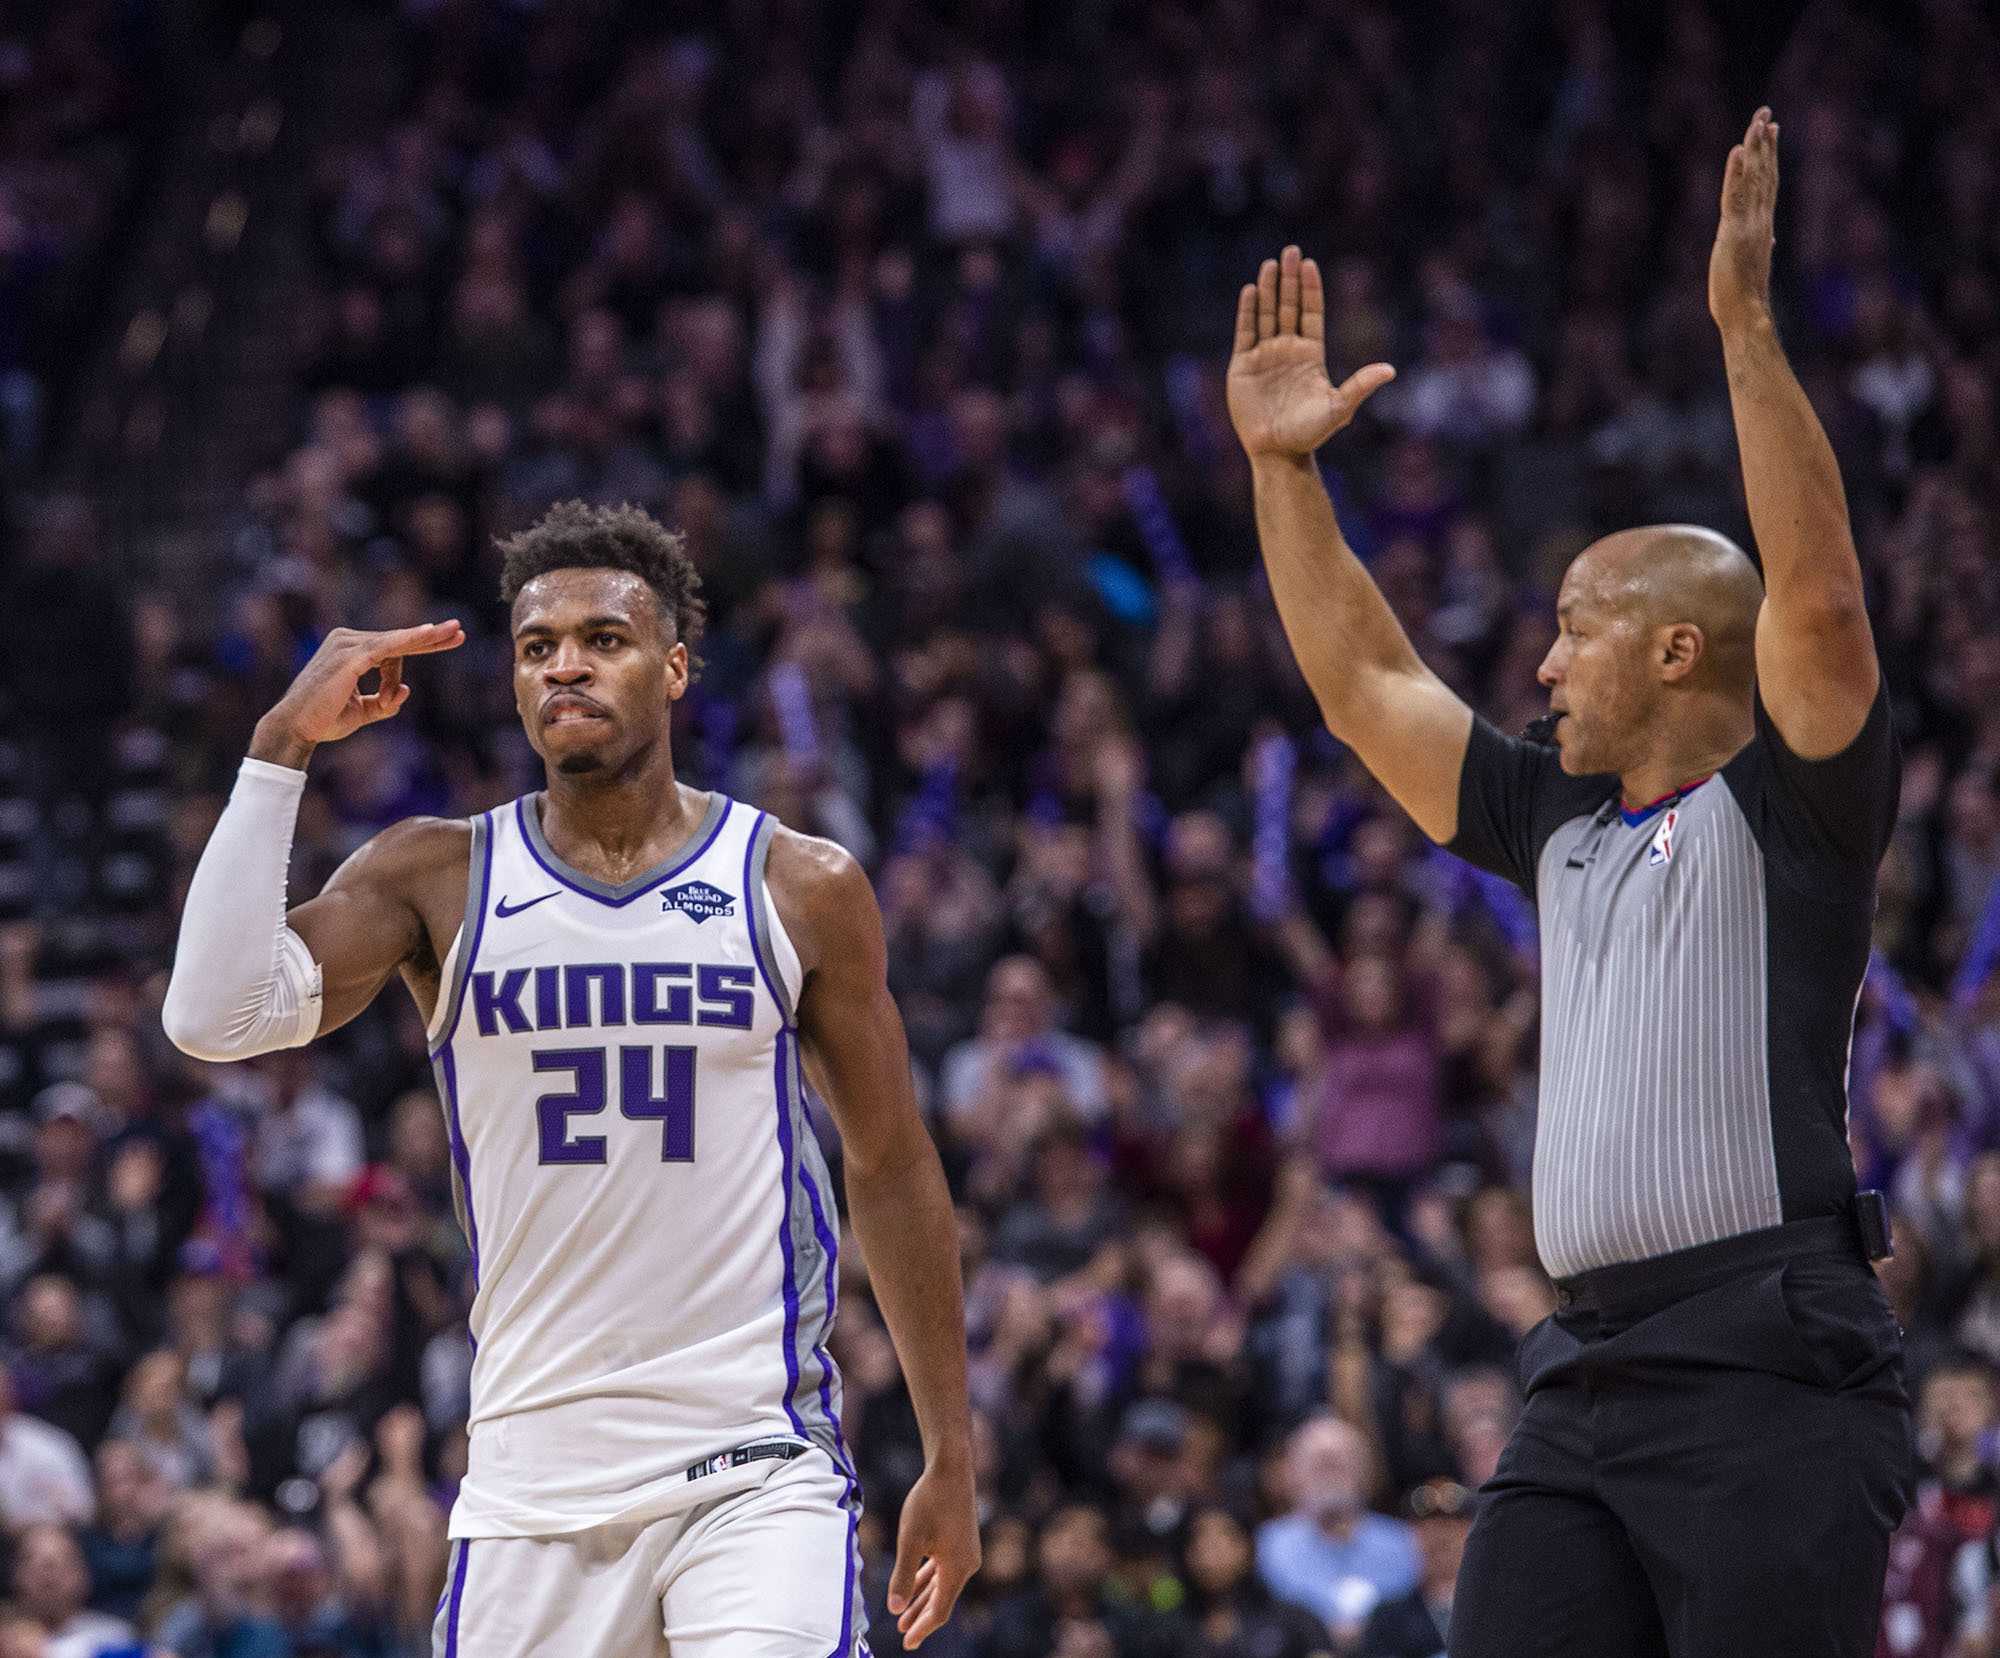 The Sacramento Kings Buddy Hield (24) celebrates a three-point basket as referee Marc Davis signals the play against the Phoenix Suns on March 23, 2019, at the Golden 1 Center in Sacramento, Calif. (Hector Amezcua/Sacramento Bee/TNS)